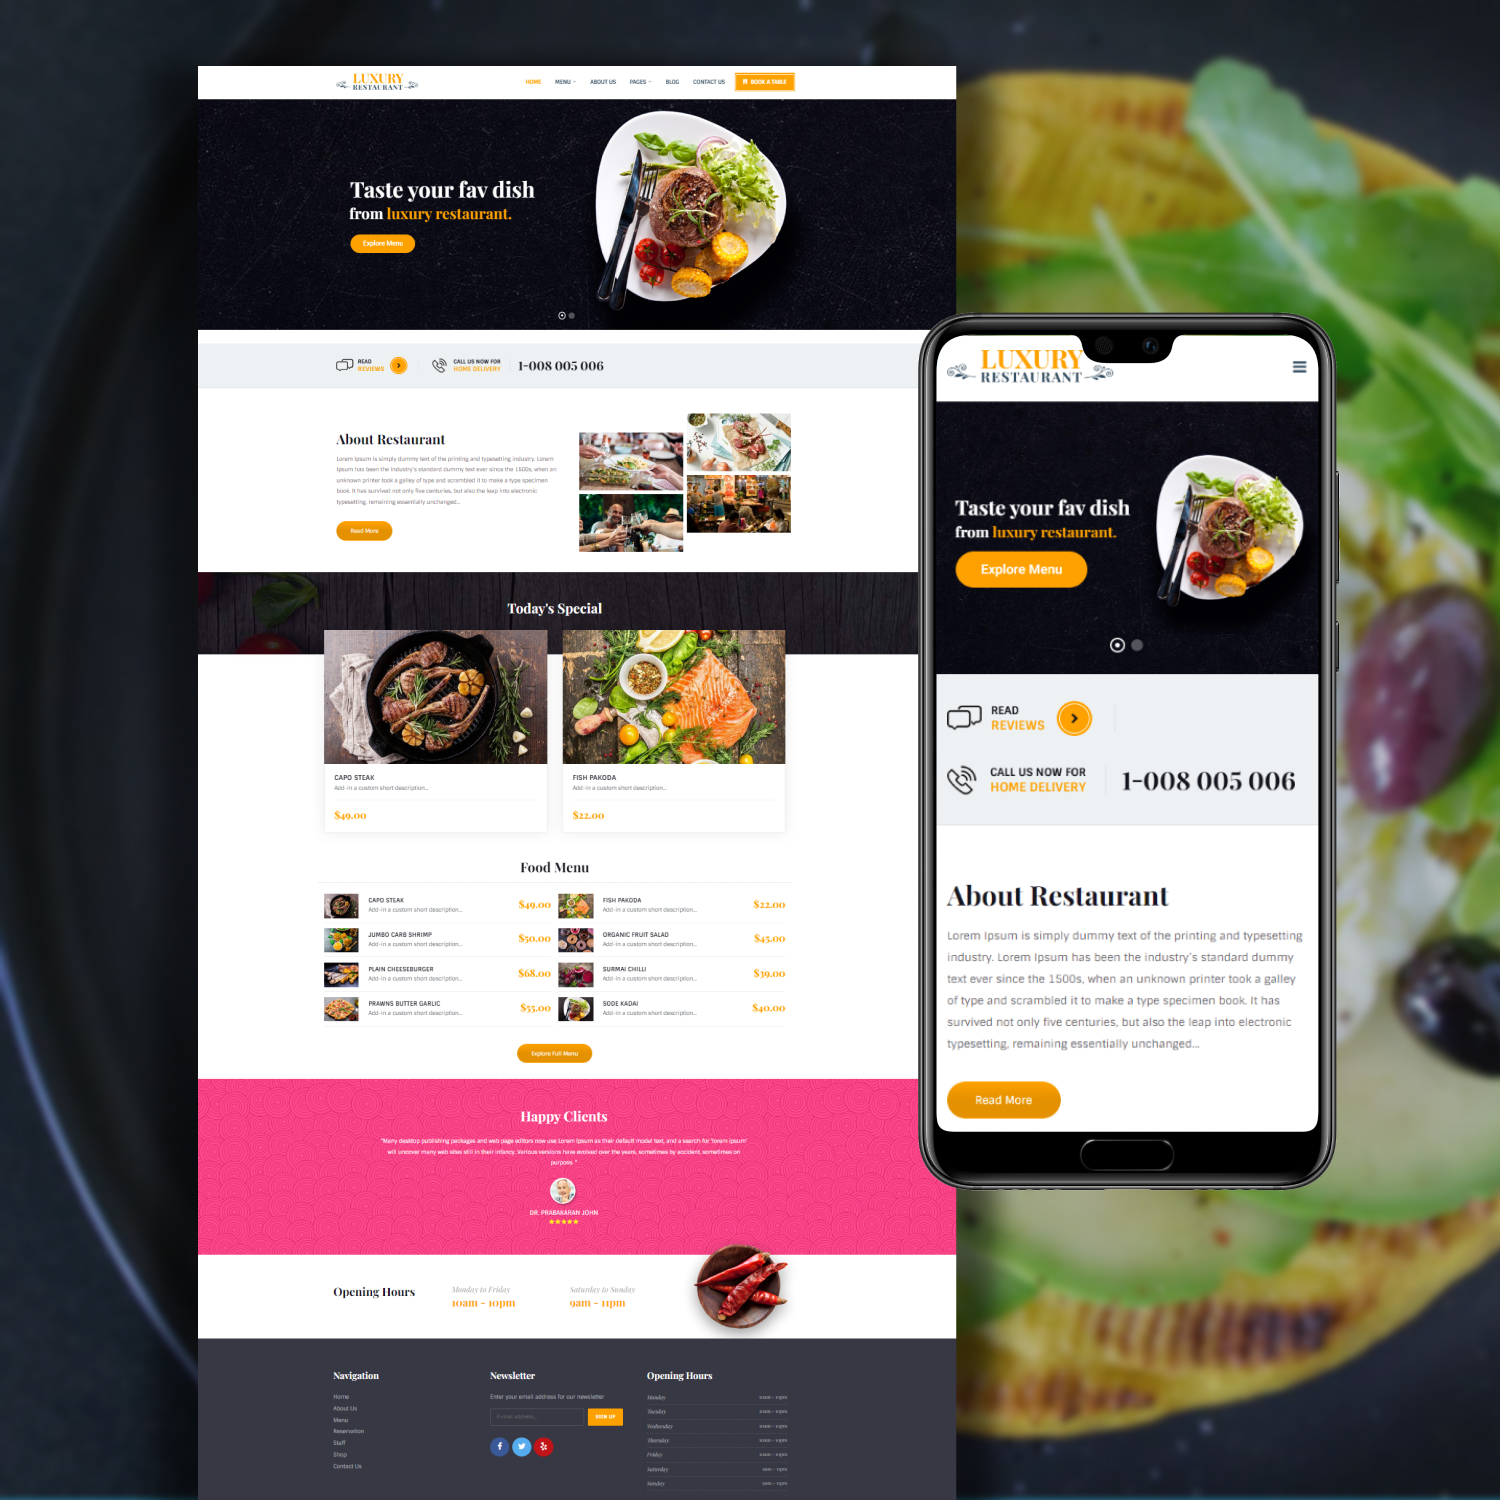 Preview luxury restaurant cafe theme.